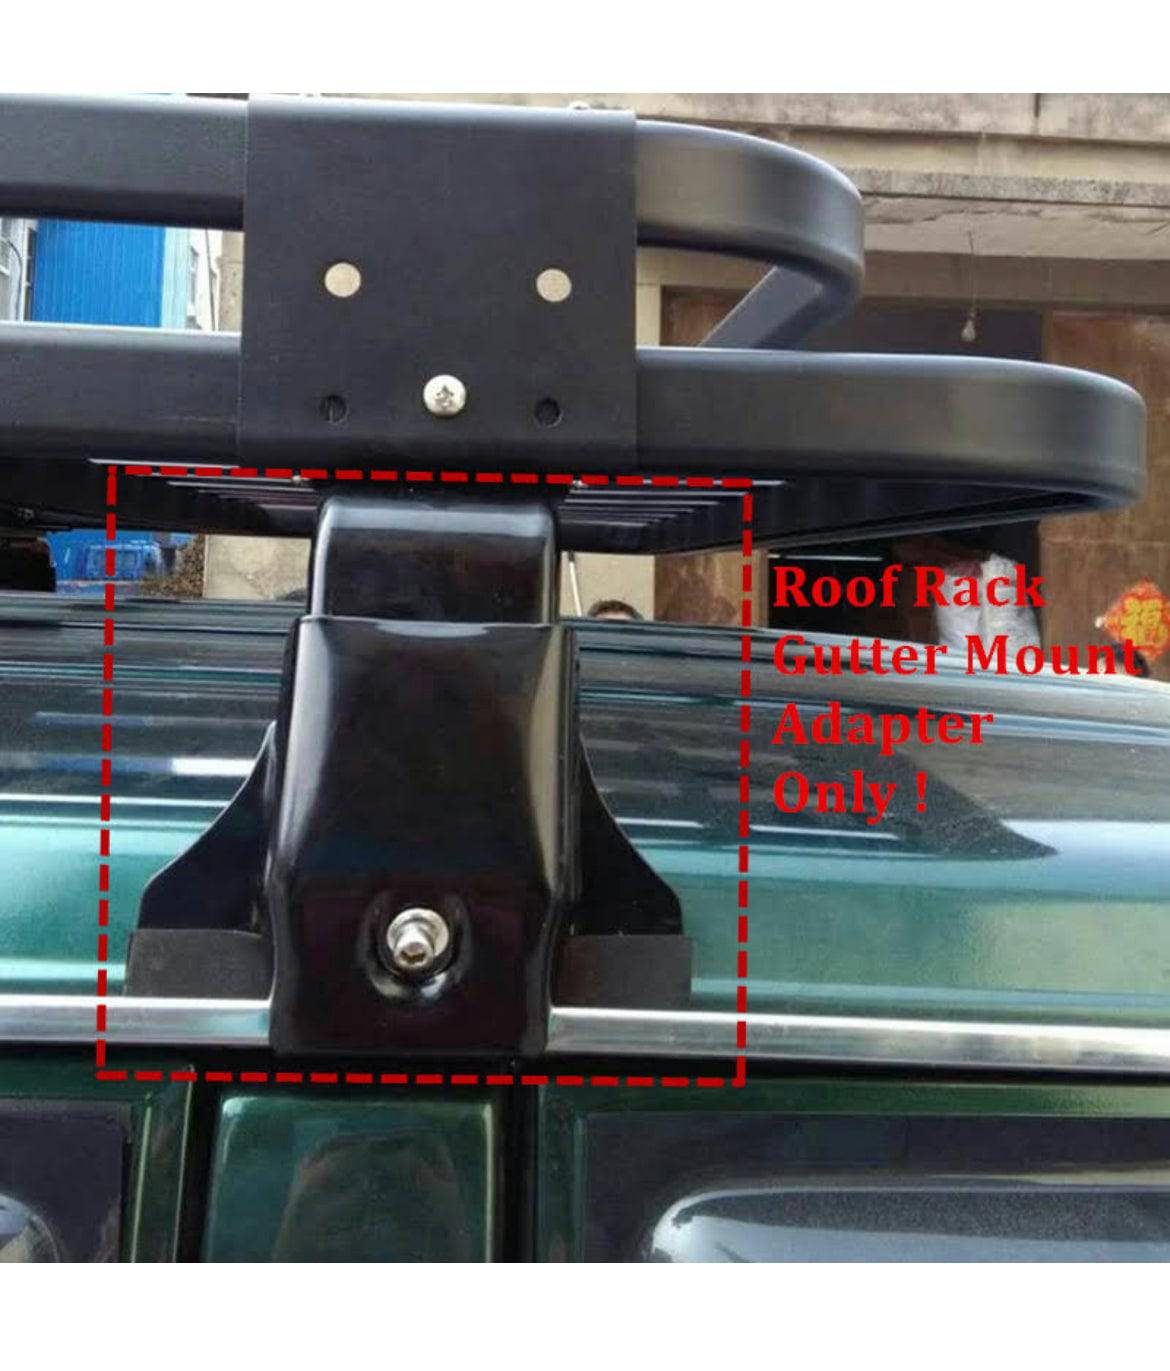 Tradesman Steel Roof Cage + Gutter Mount Suits Toyota Landcruiser 79 Series Dual Cab